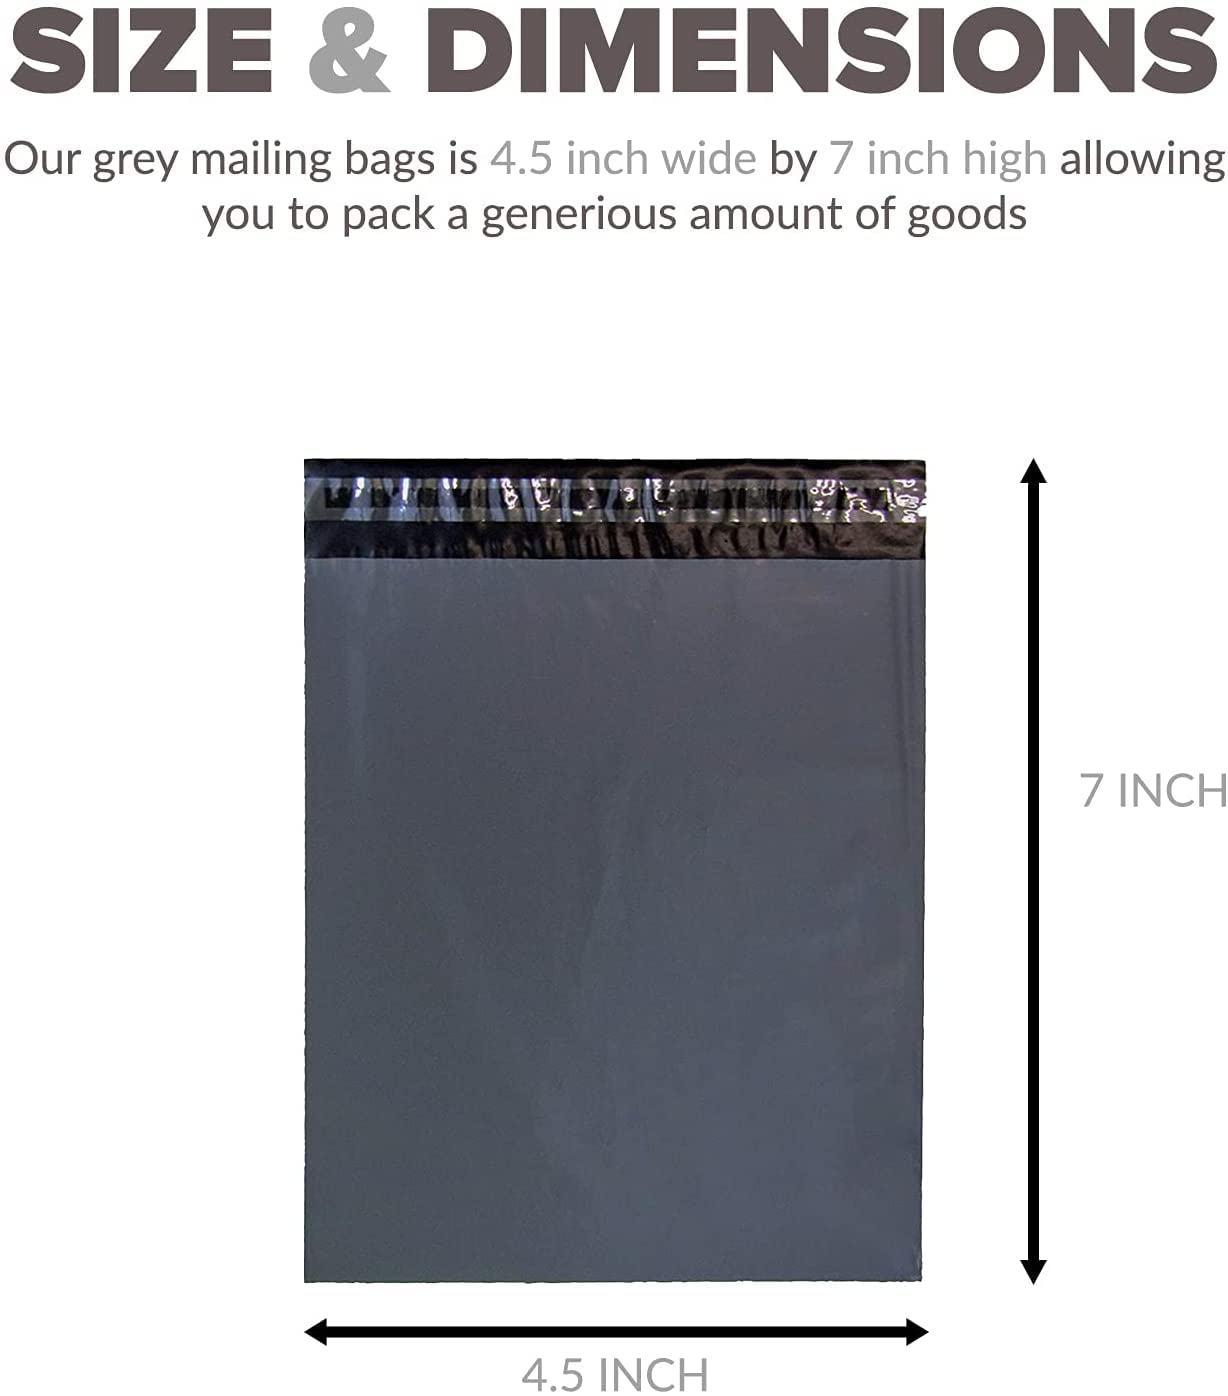 100x Grey Mailing Poly Postal Self Seal Bags 4.5 x 7 Inches (11.4 x 18.8cm) Mailing Bags Postage Packaging Assorted Mailers Posting Shipping Post Parcels Package Bags